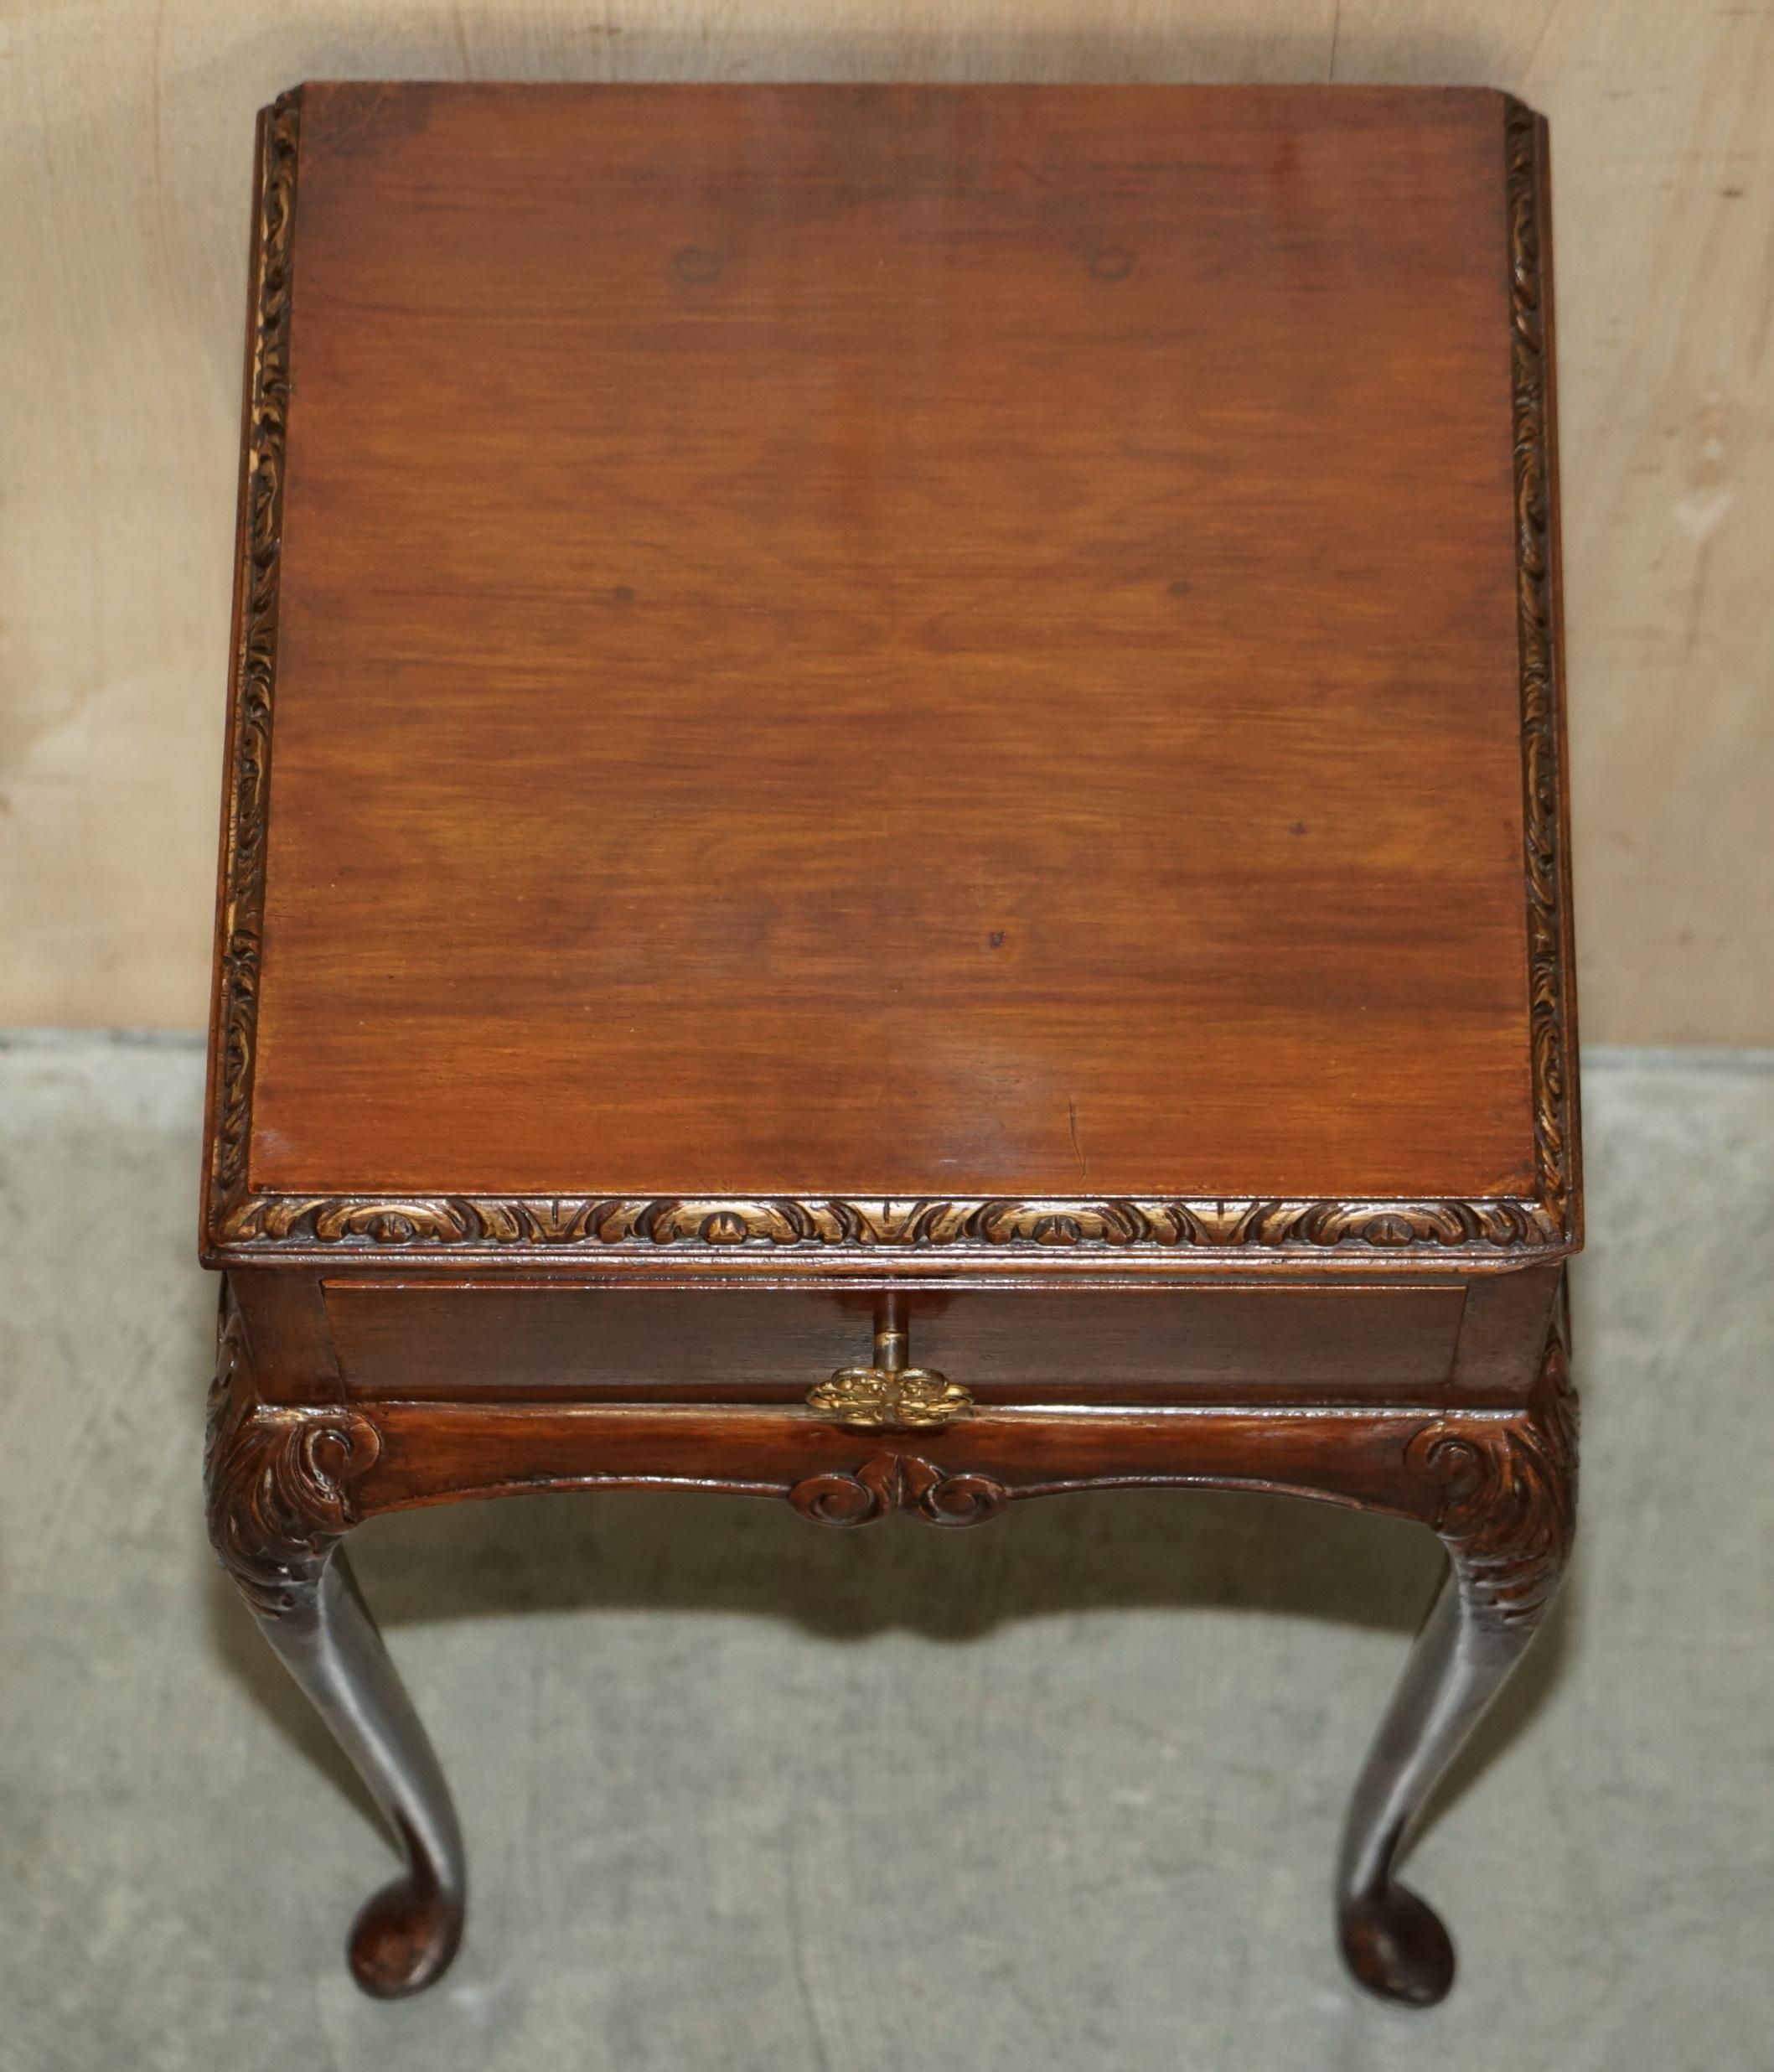 PAIR OF ANTIQUE VICTORIAN ELEGANT CABRIOLE LEGGED SINGLE DRAWER TALL SiDE TABLES For Sale 5